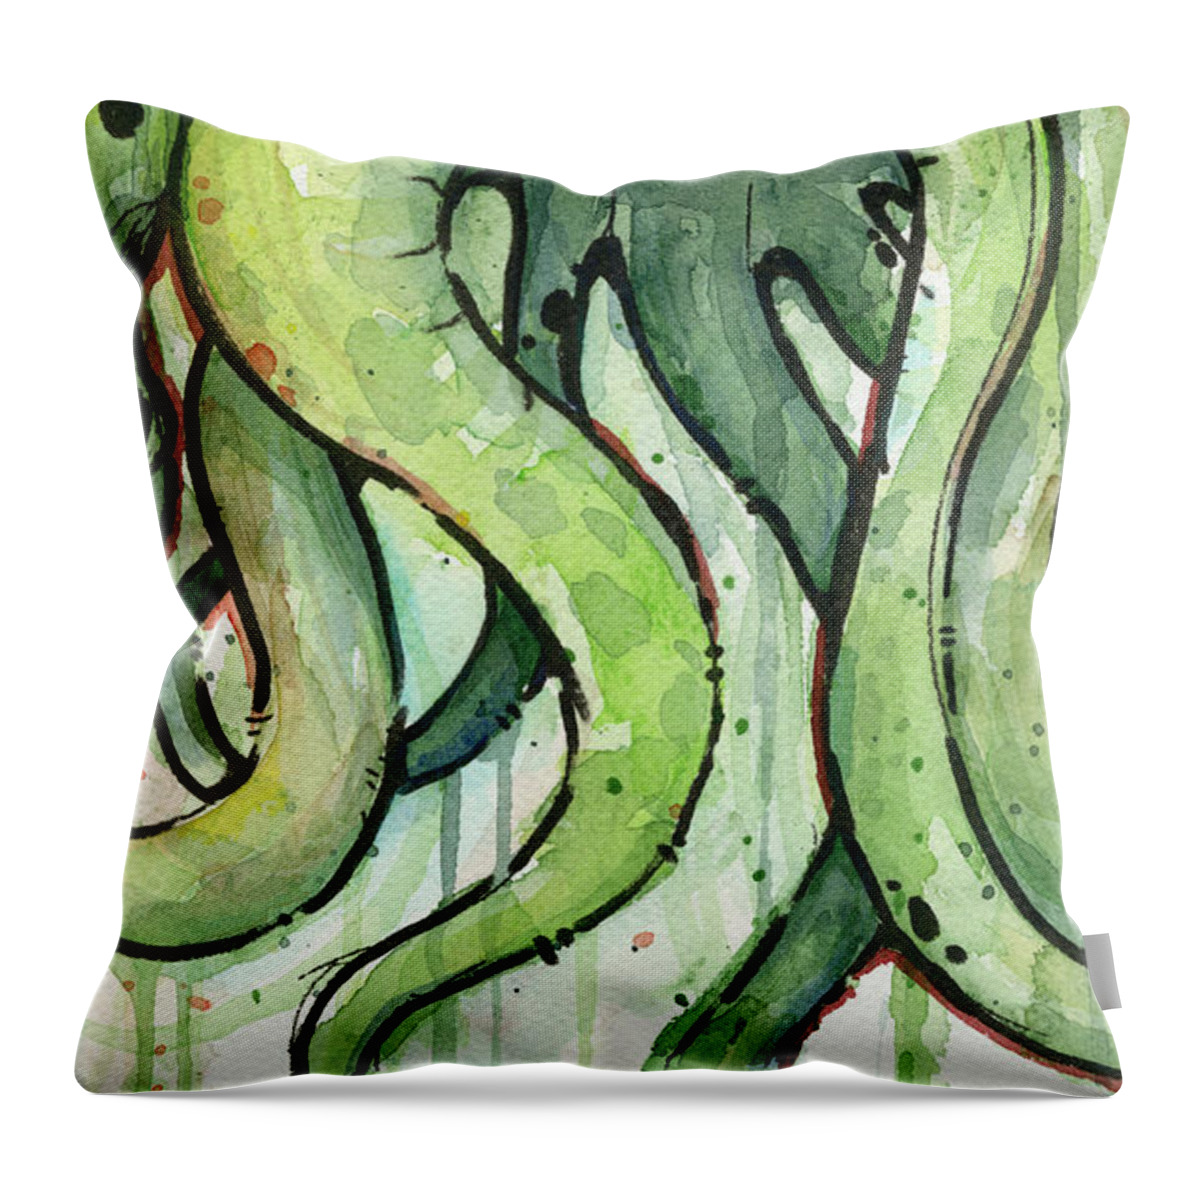 Cthulhu Throw Pillow featuring the painting Green Tentacles by Olga Shvartsur